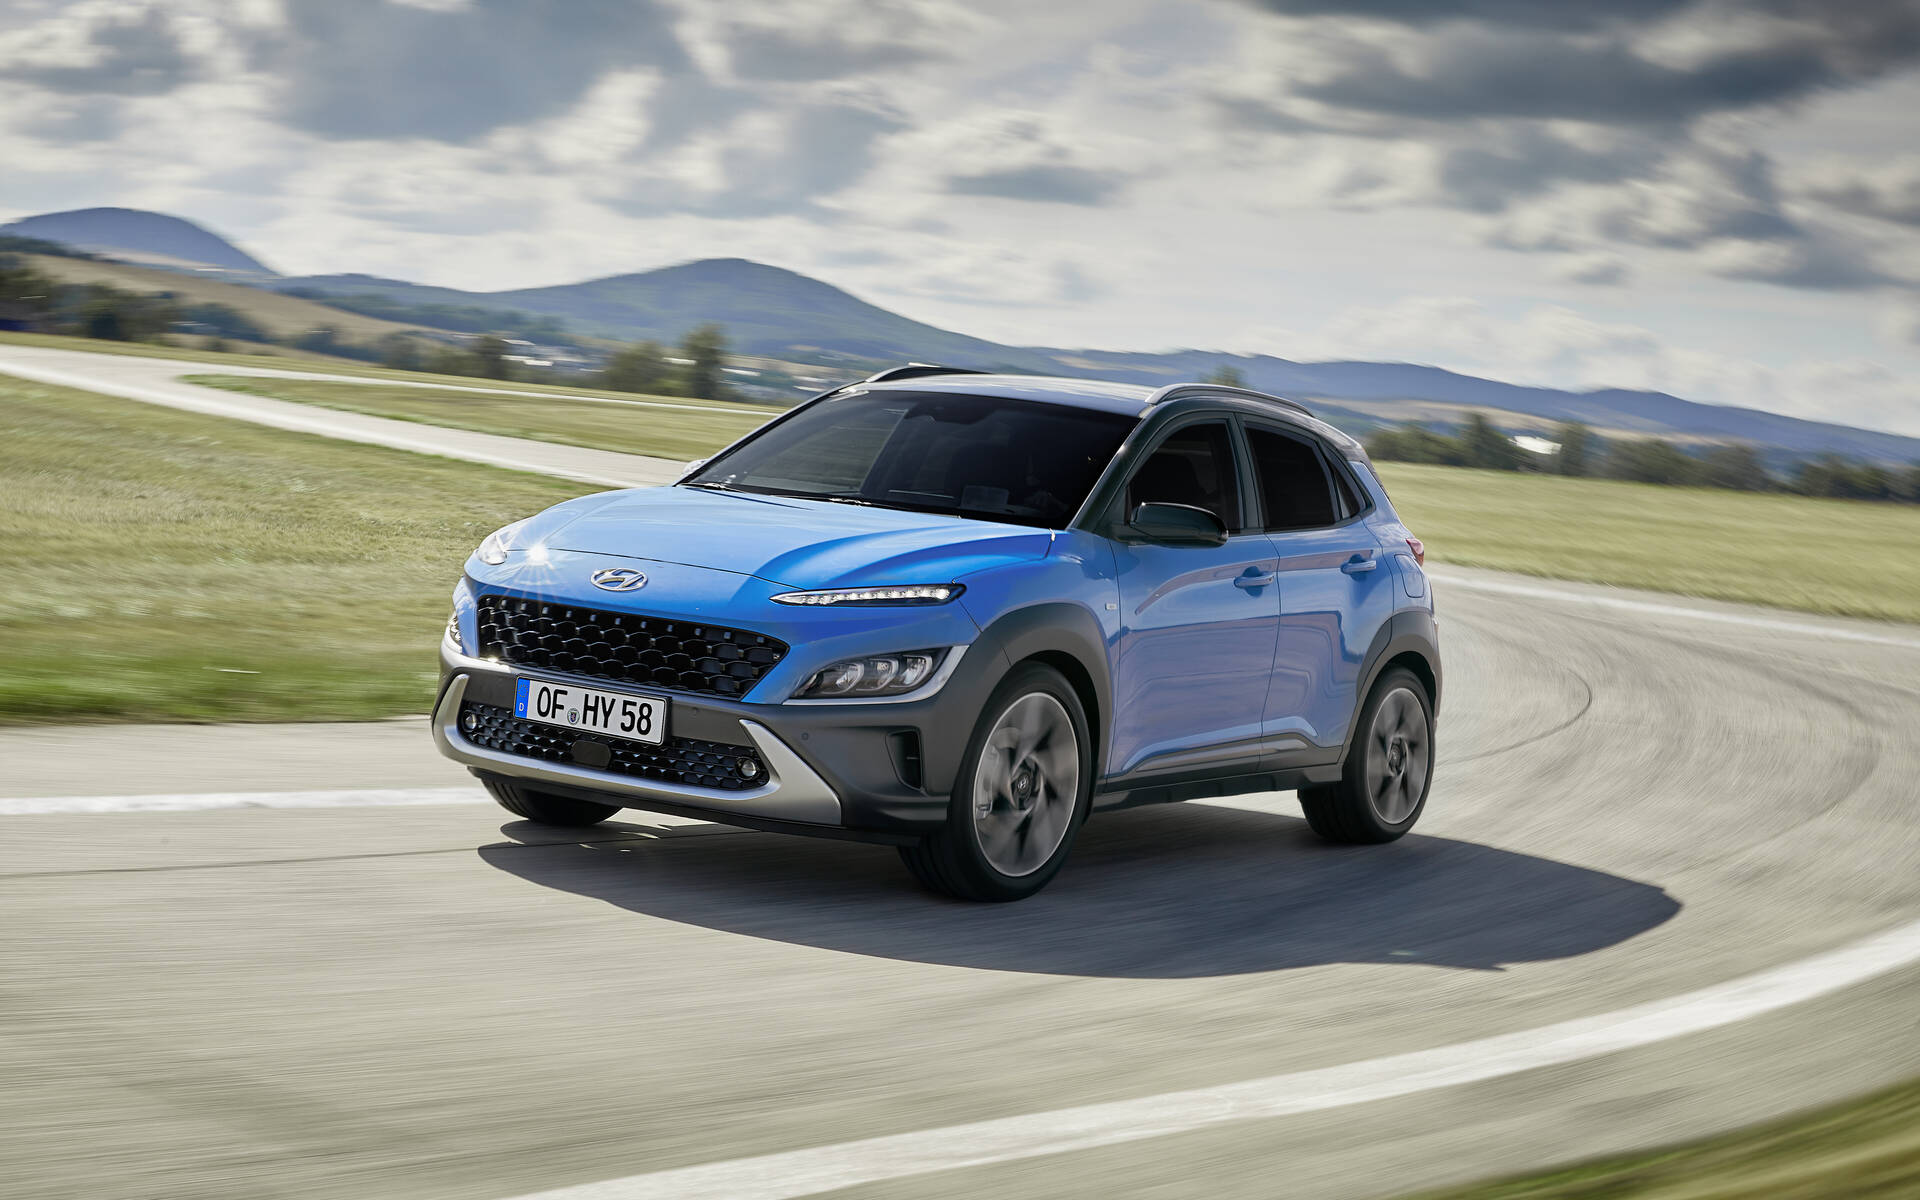 2022 Hyundai Kona Officially Unveiled With New Looks, N ...